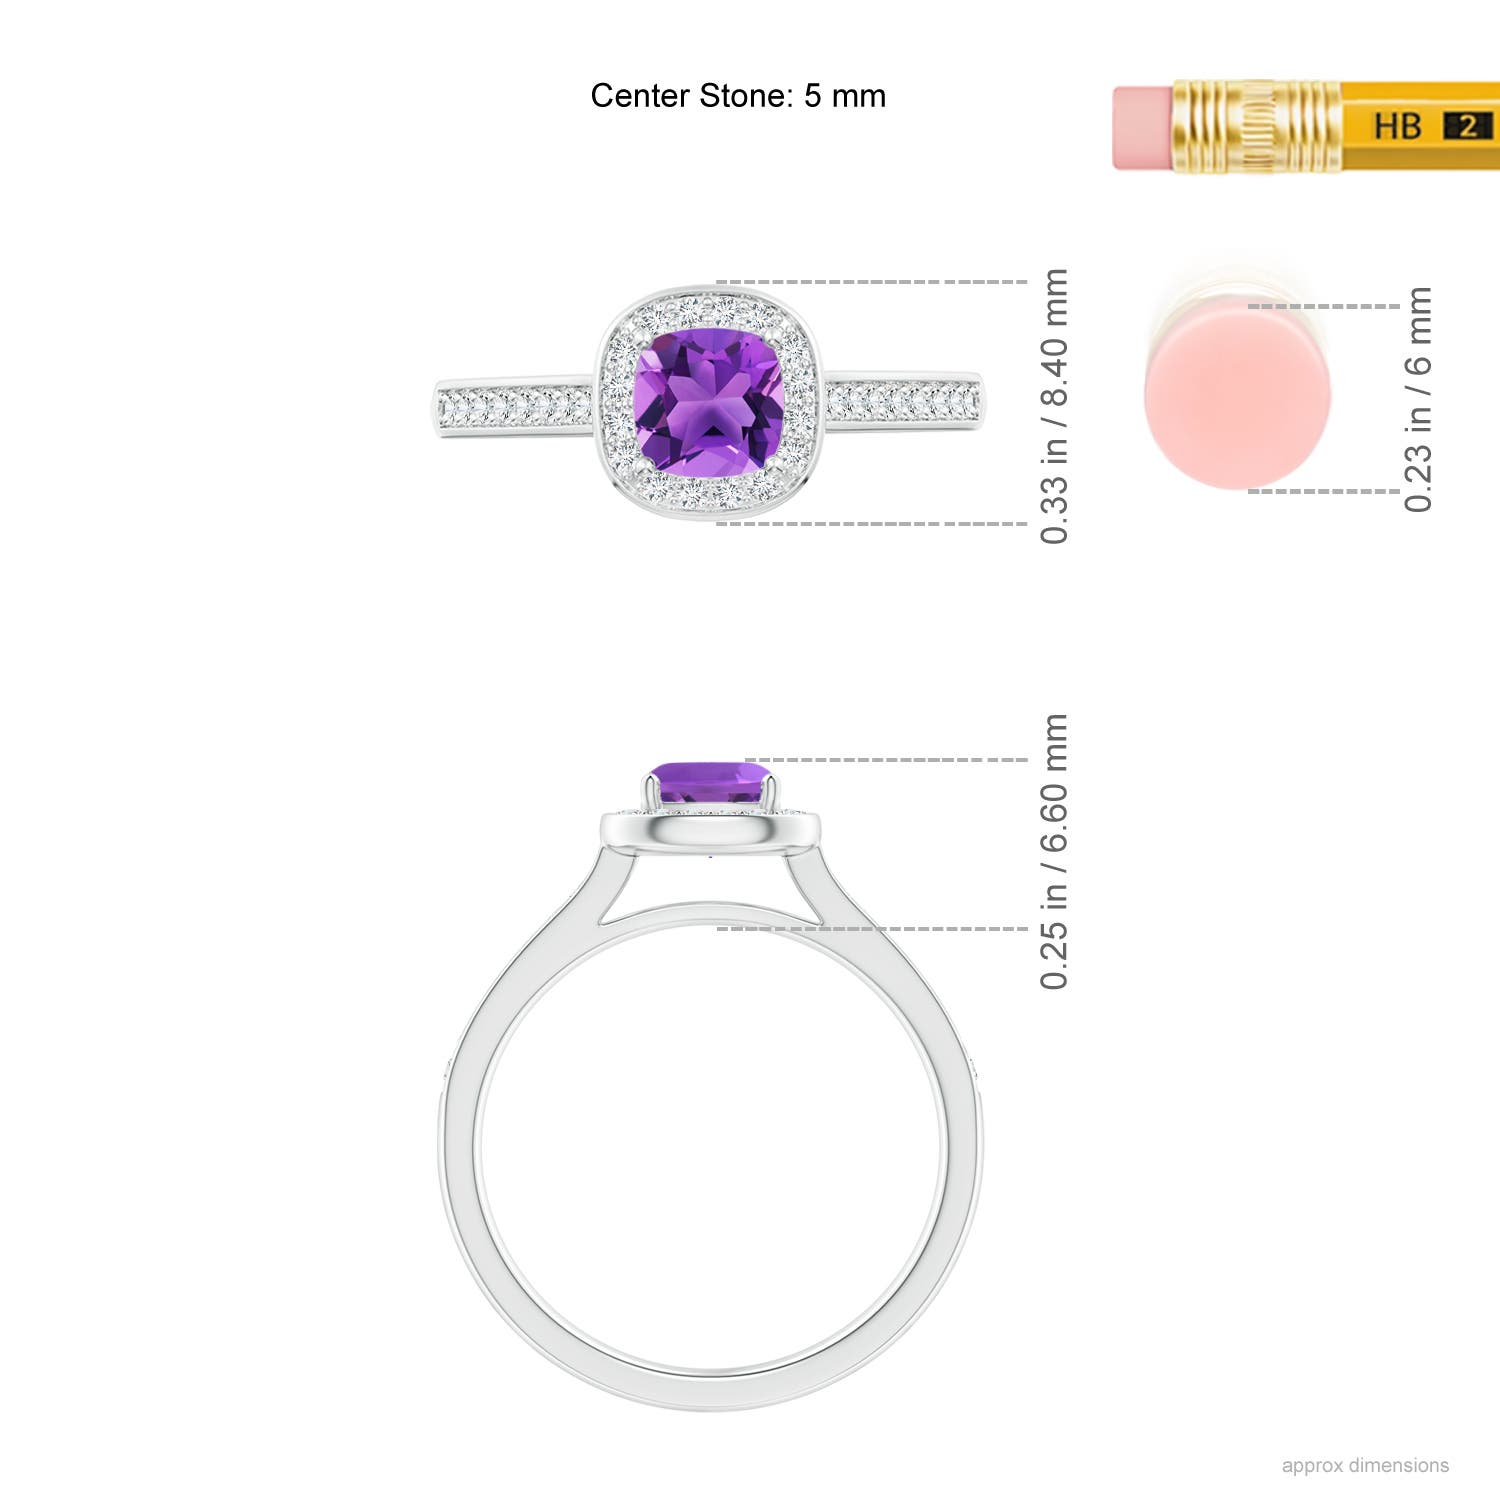 AAA - Amethyst / 0.81 CT / 14 KT White Gold